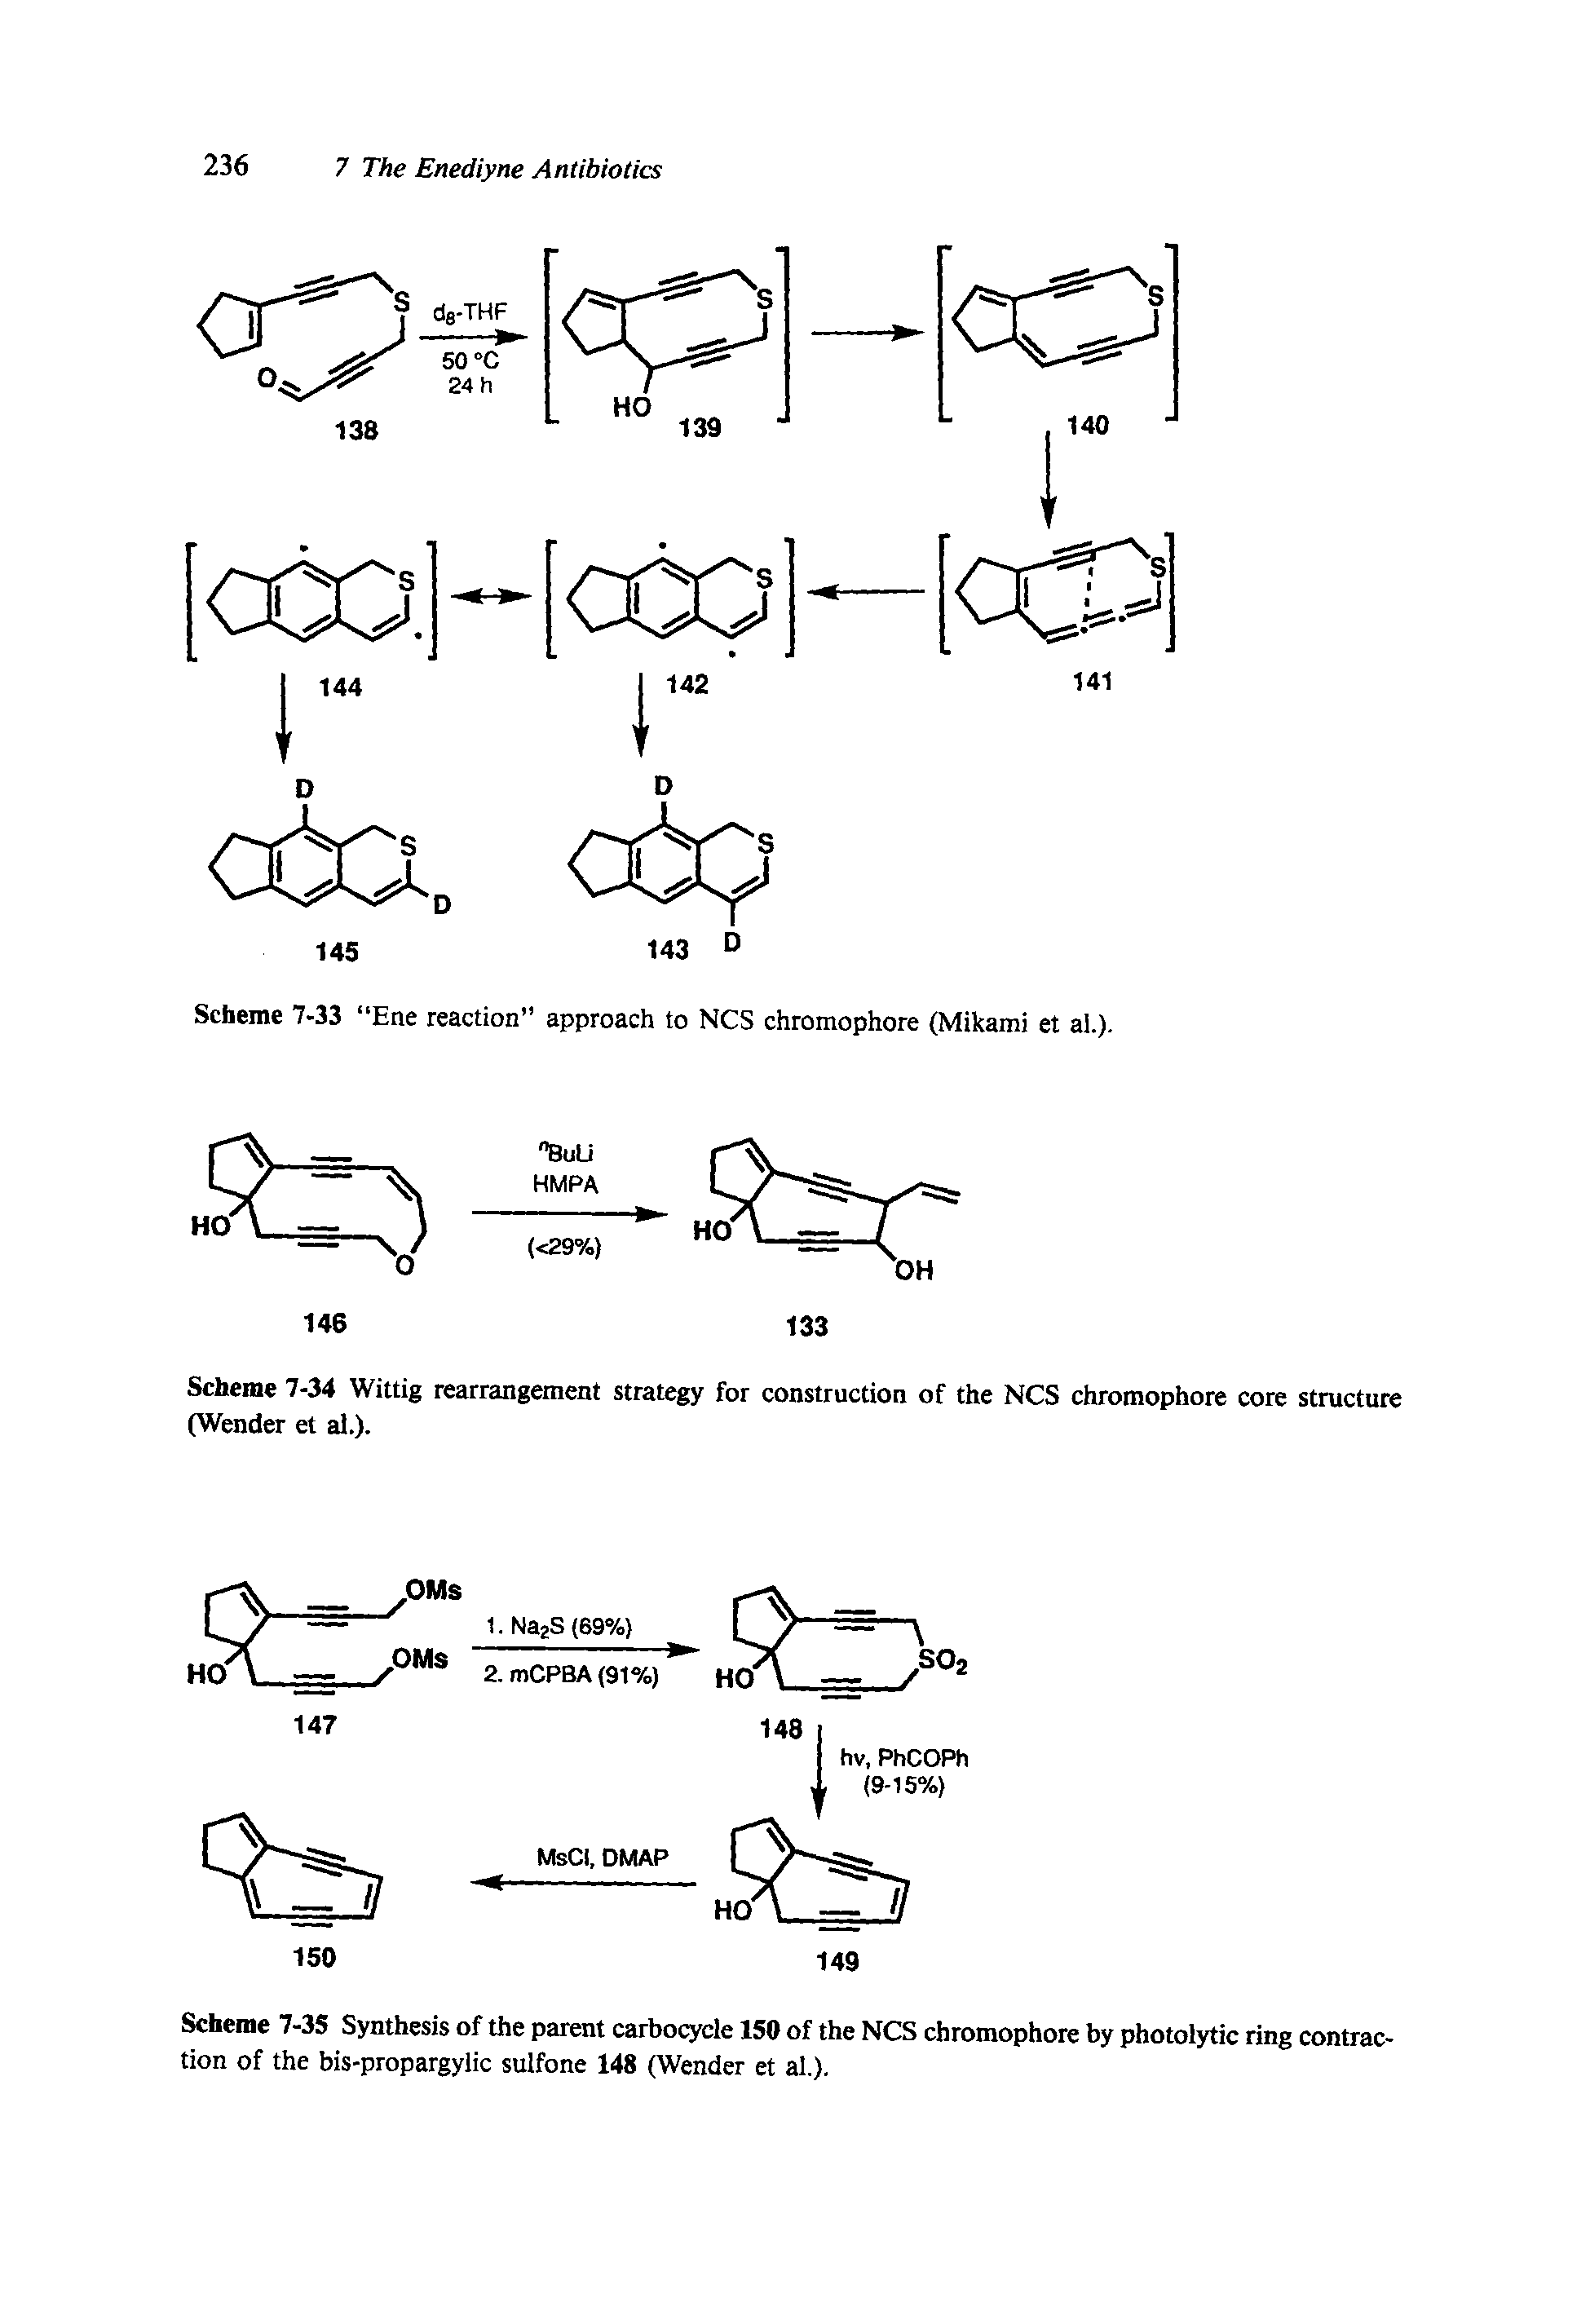 Scheme 7-35 Synthesis of the parent carbocycle 150 of the NCS chromophore by photolytic ring contraction of the bis-propargylic sulfone 148 (Wender et al.).